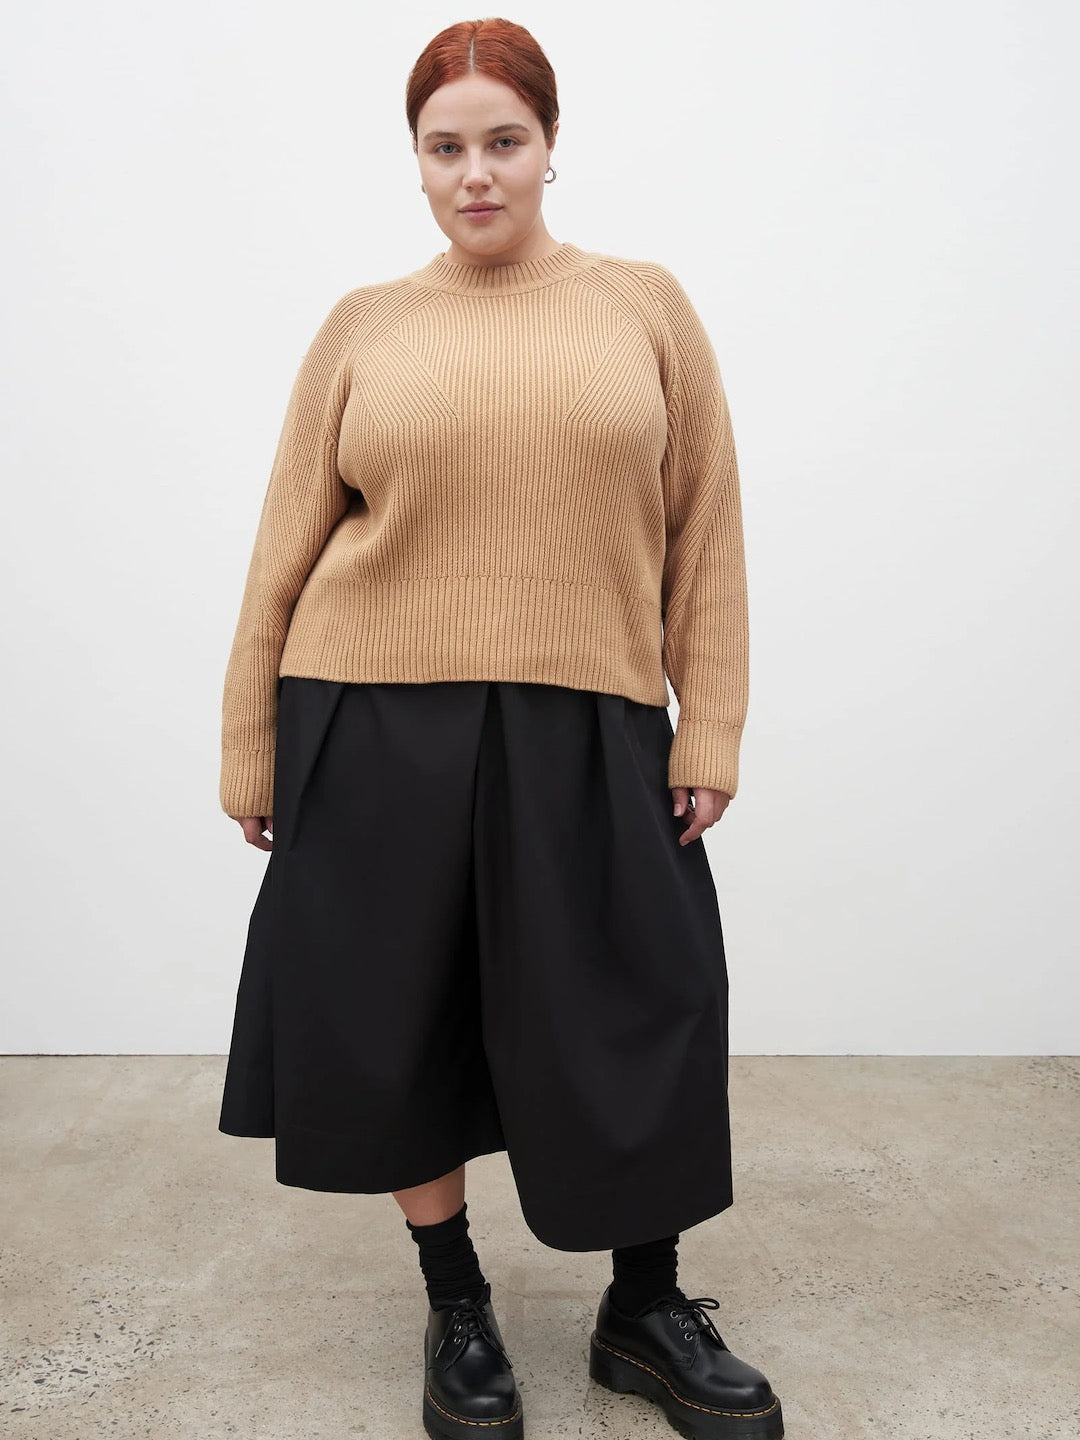 The model is wearing a Henri Crew - Beige sweater and black skirt by Kowtow.